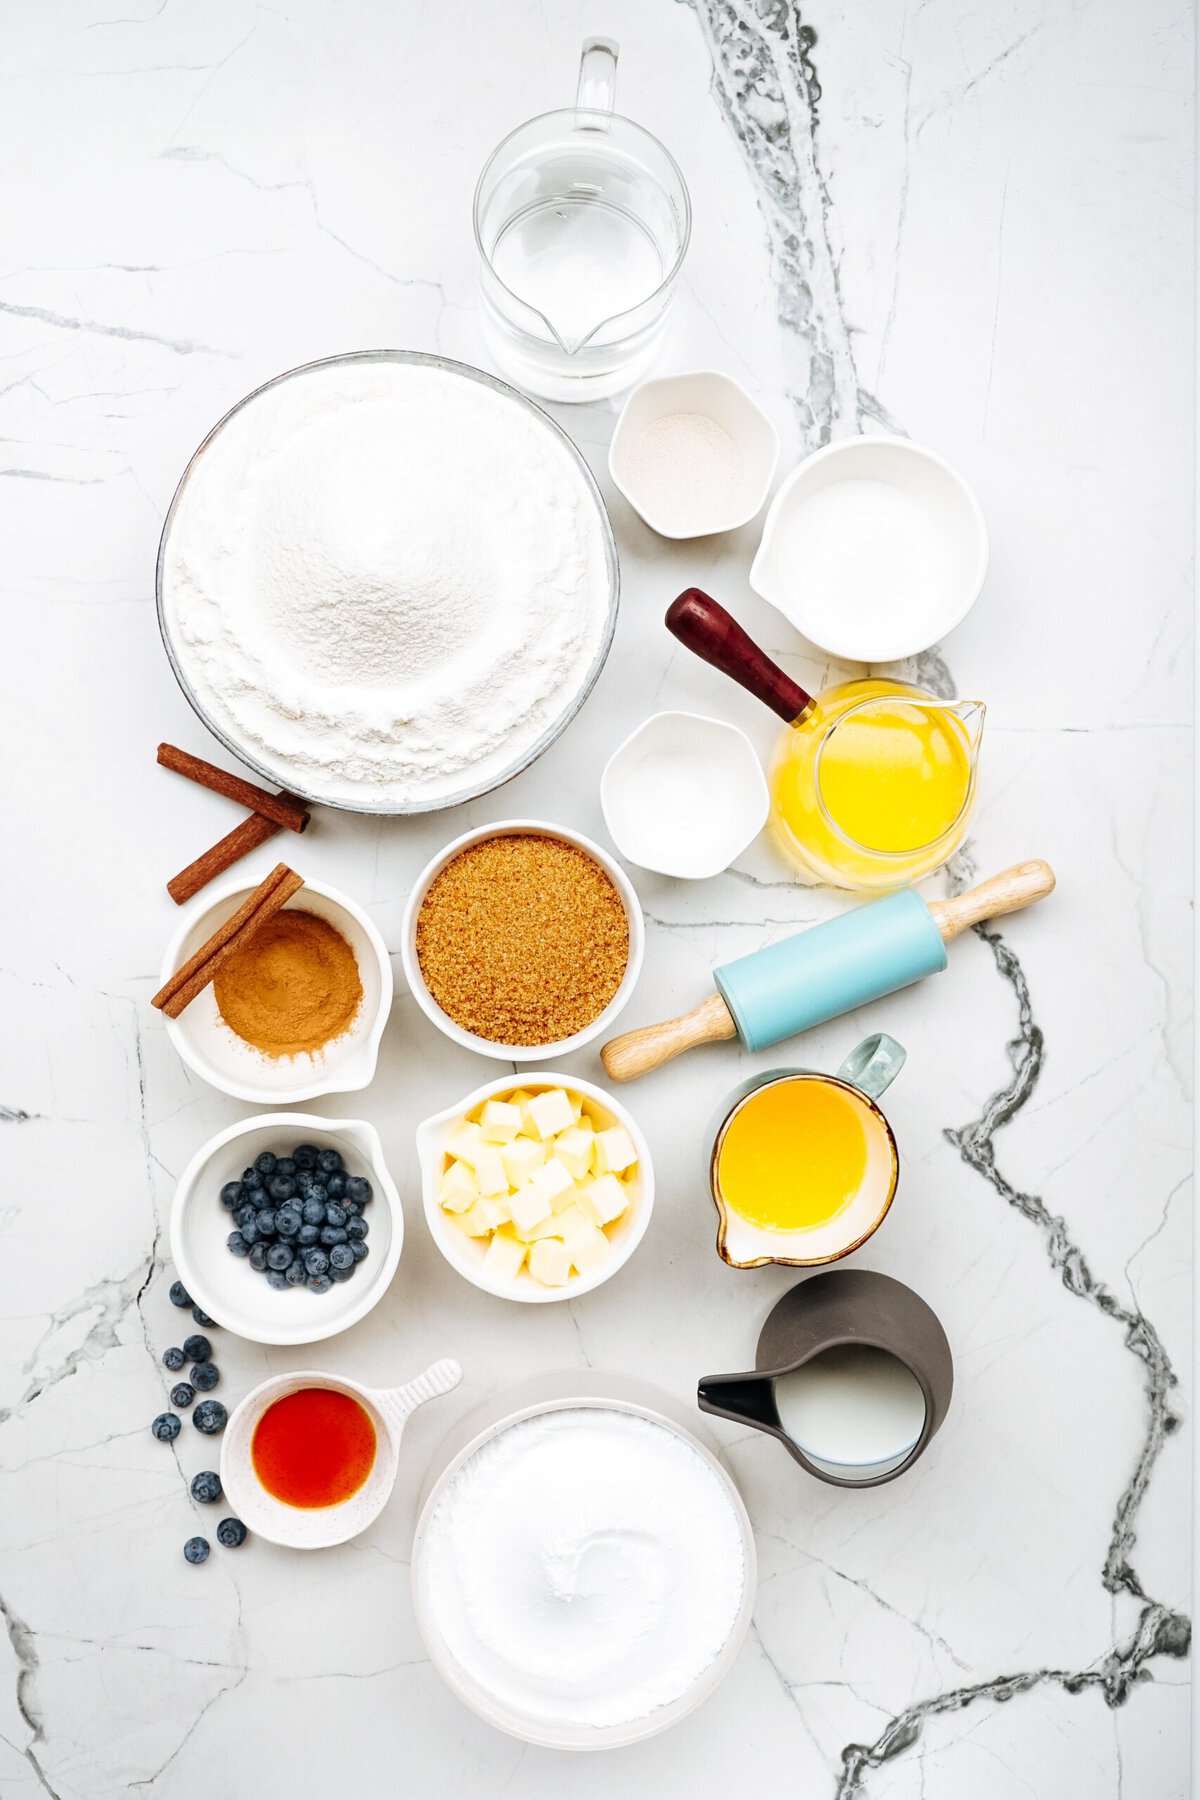 A flat lay of baking ingredients including flour, sugar, butter, eggs, milk, blueberries, cinnamon, brown sugar, and various kitchen tools arranged on a marble surface.